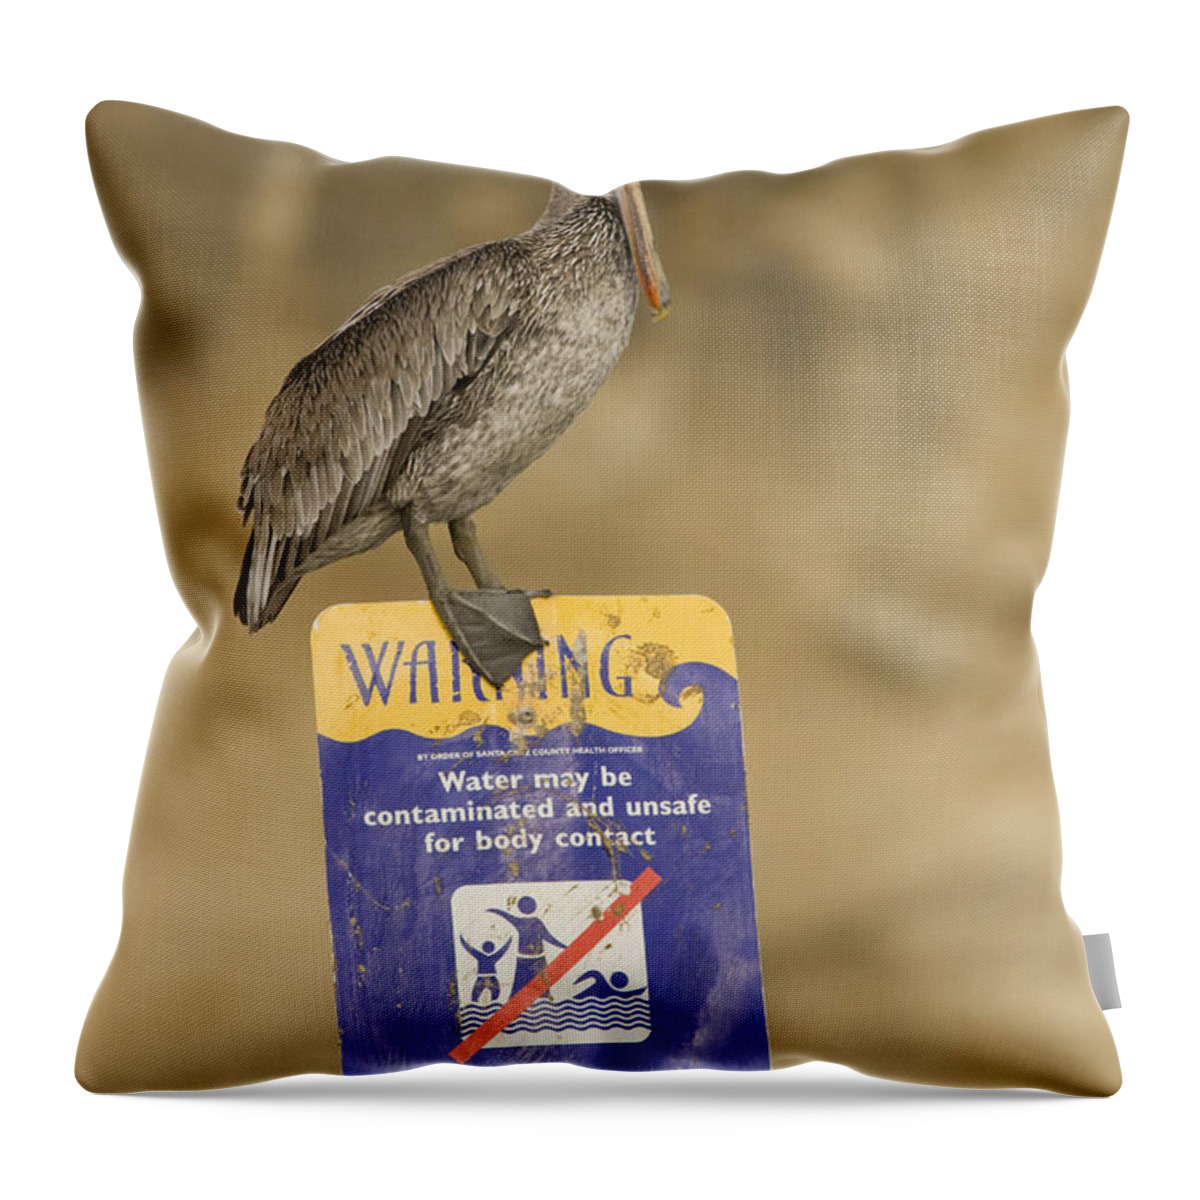 00429766 Throw Pillow featuring the photograph Brown Pelican On Contaminated Water by Sebastian Kennerknecht